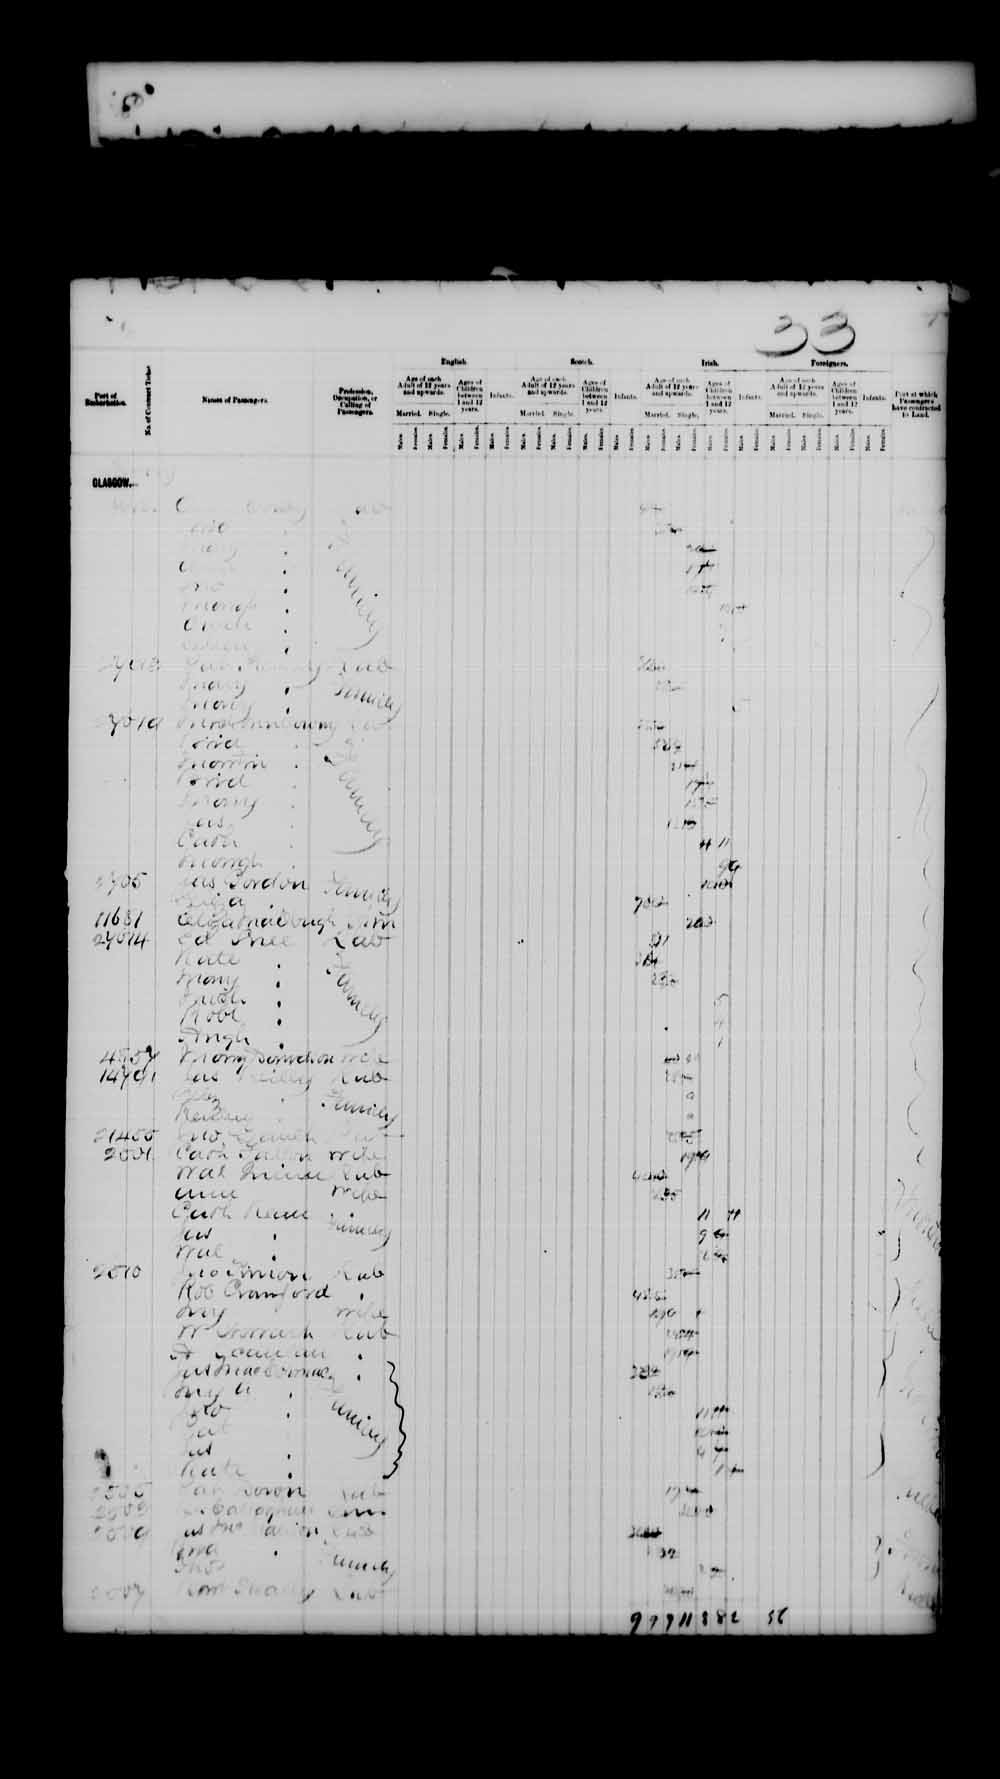 Digitized page of Passenger Lists for Image No.: e003543099